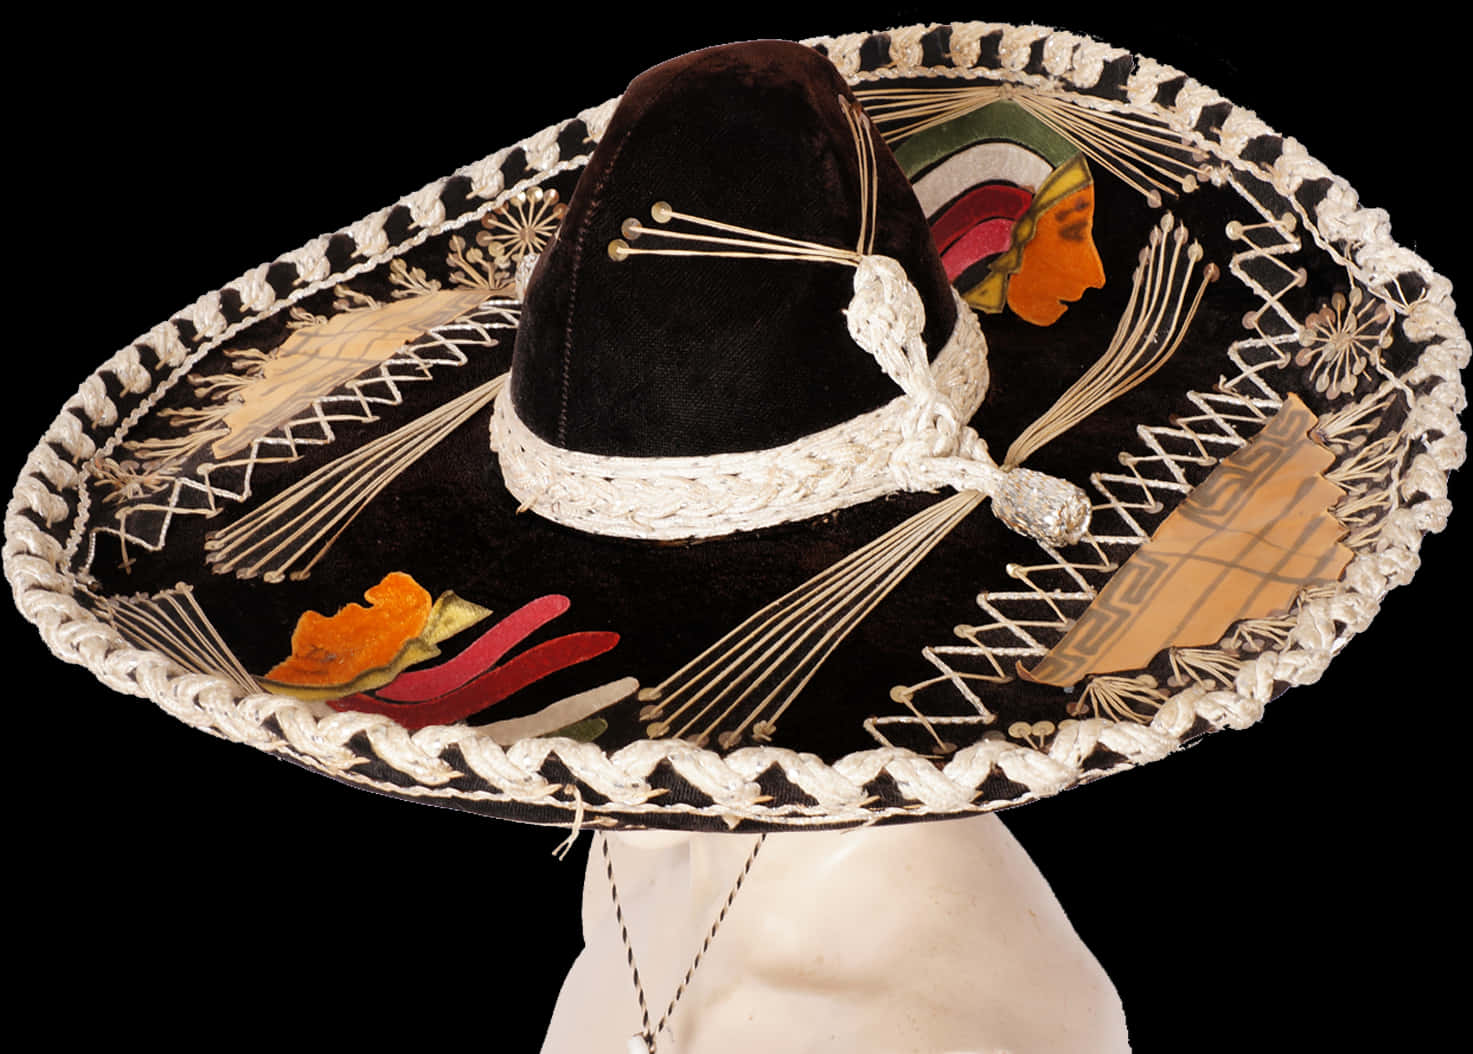 A Black And White Sombrero With A White Rope